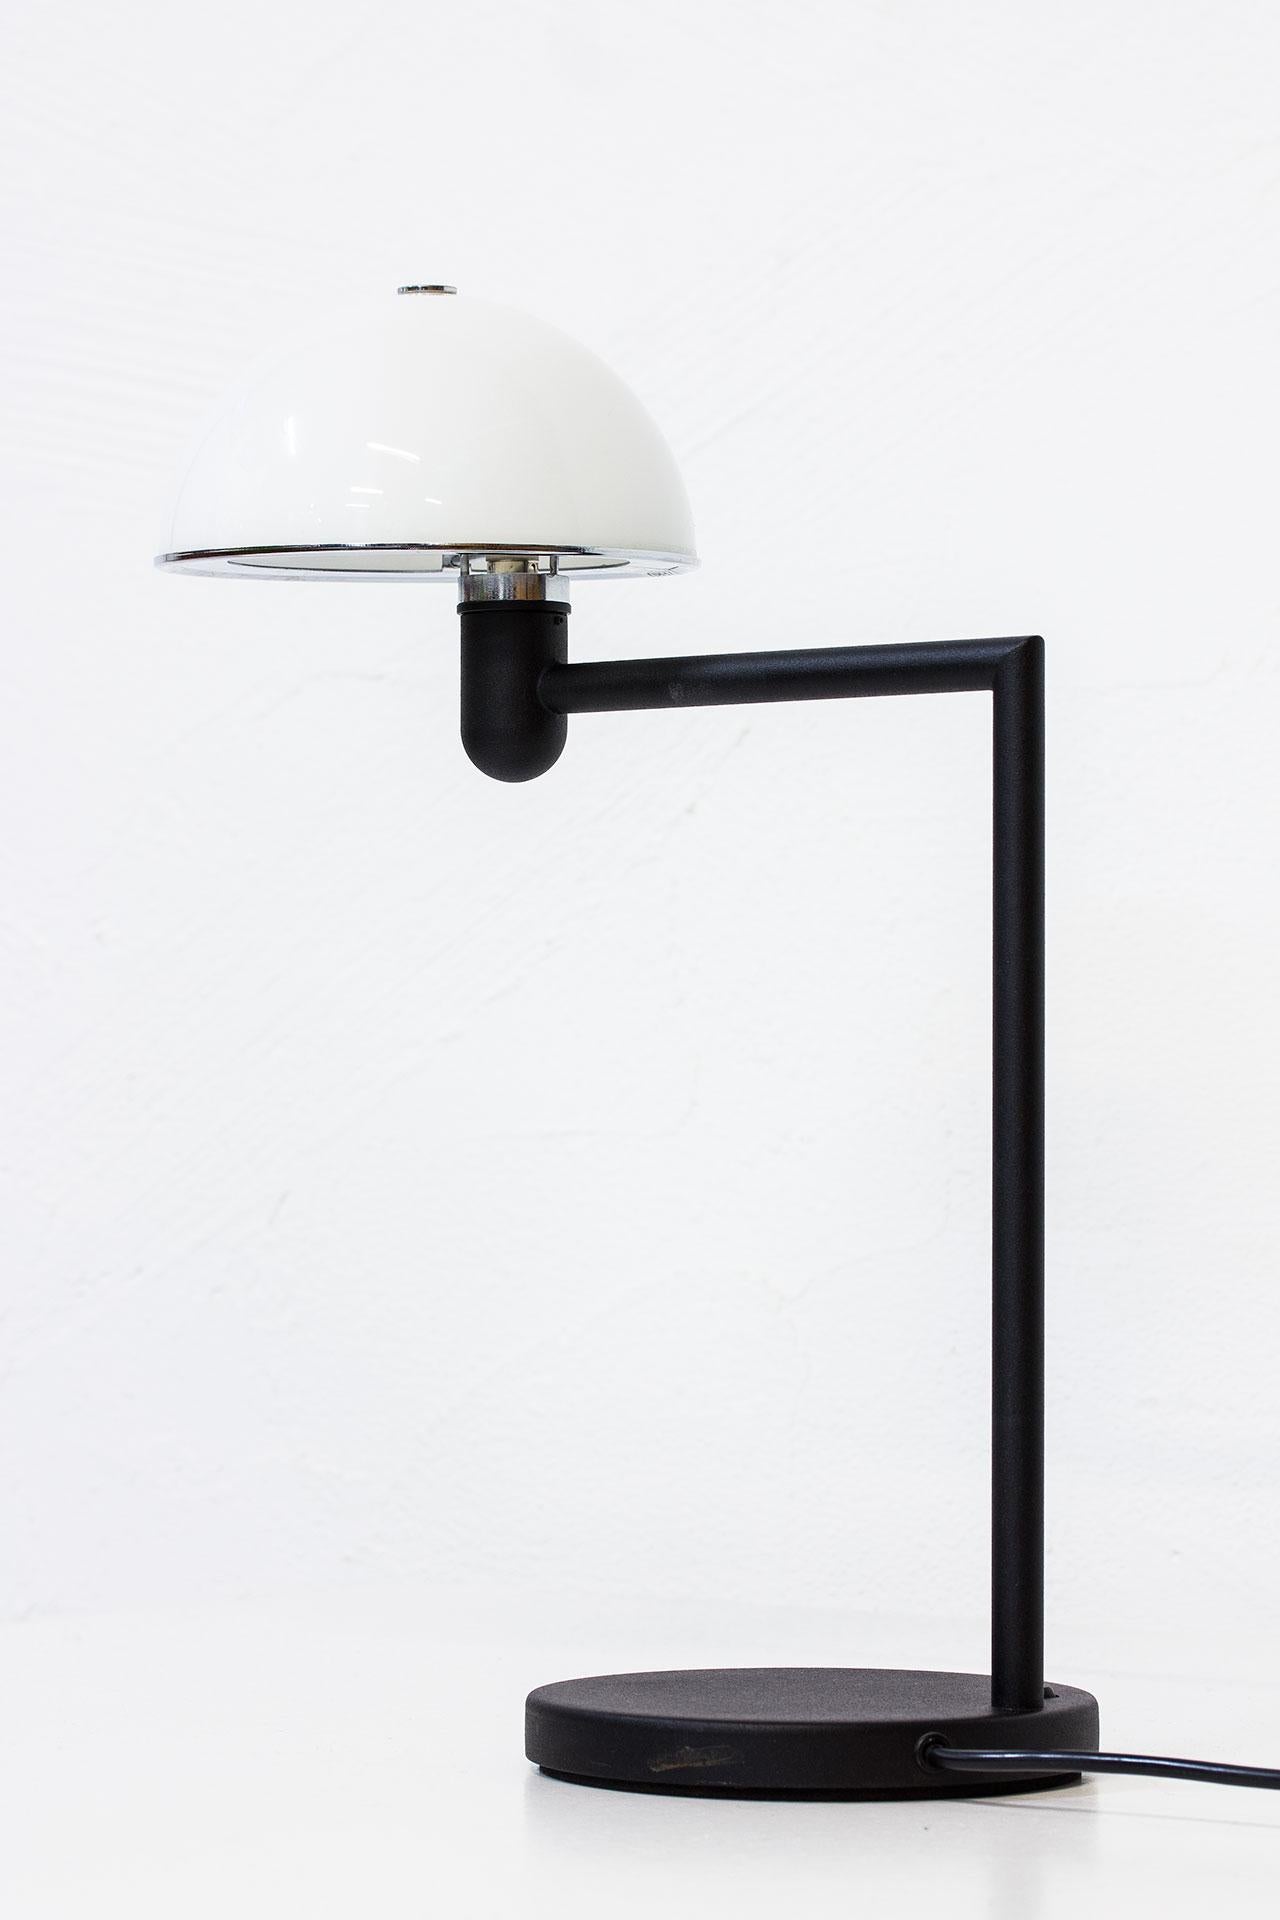 Table lamp designed by Per Sundstedt for Zero Interior in Sweden during the 1980s. Matte black painted steel stem with a white opal glass diffuser.